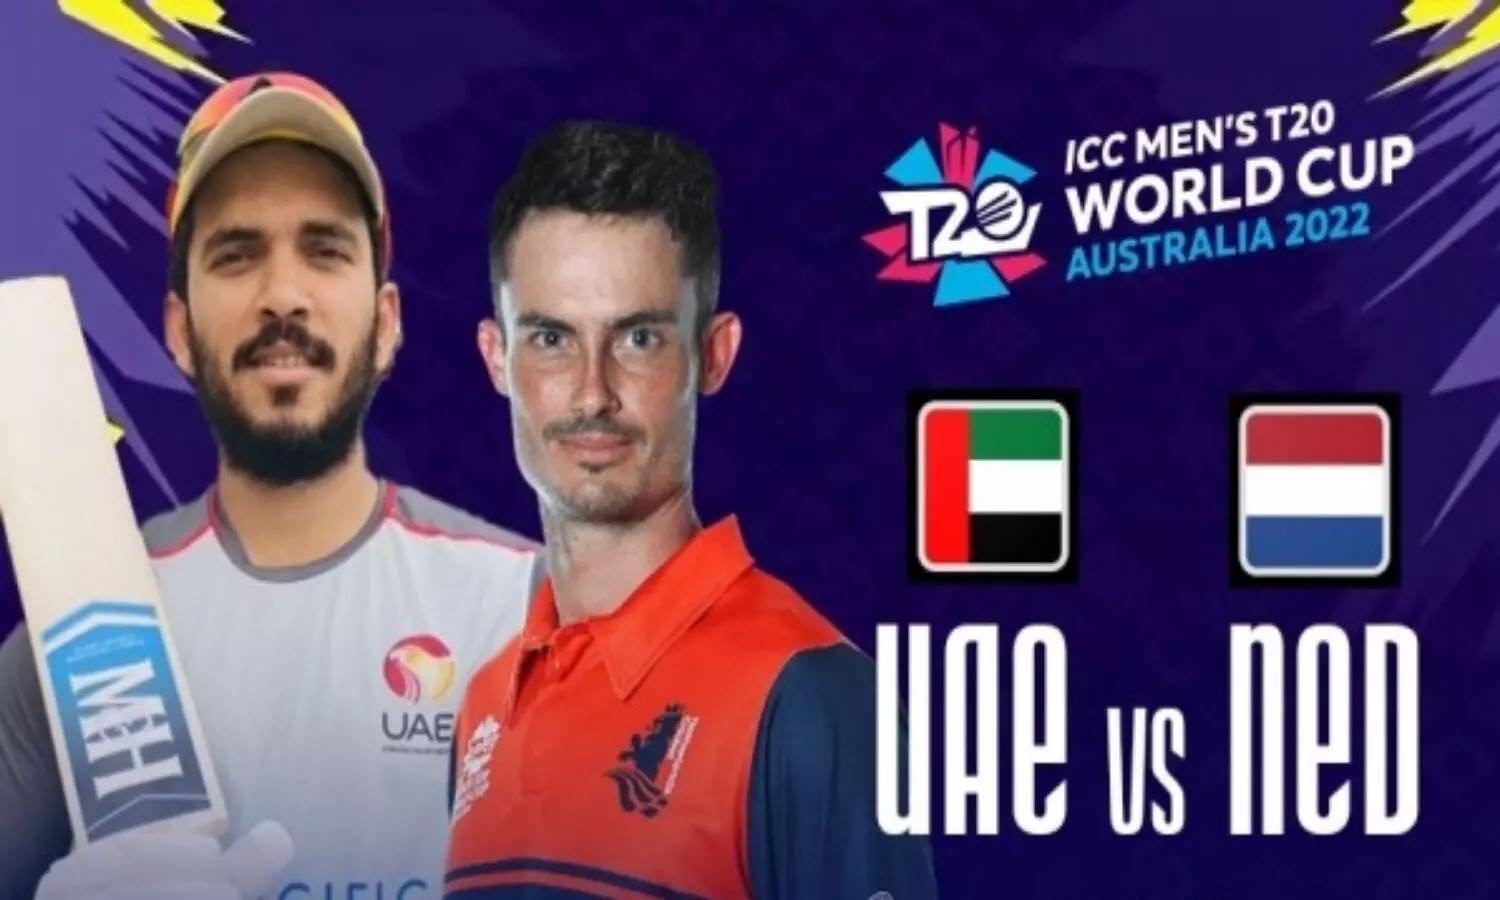 T20 World Cup 2022 UAE vs NED Match